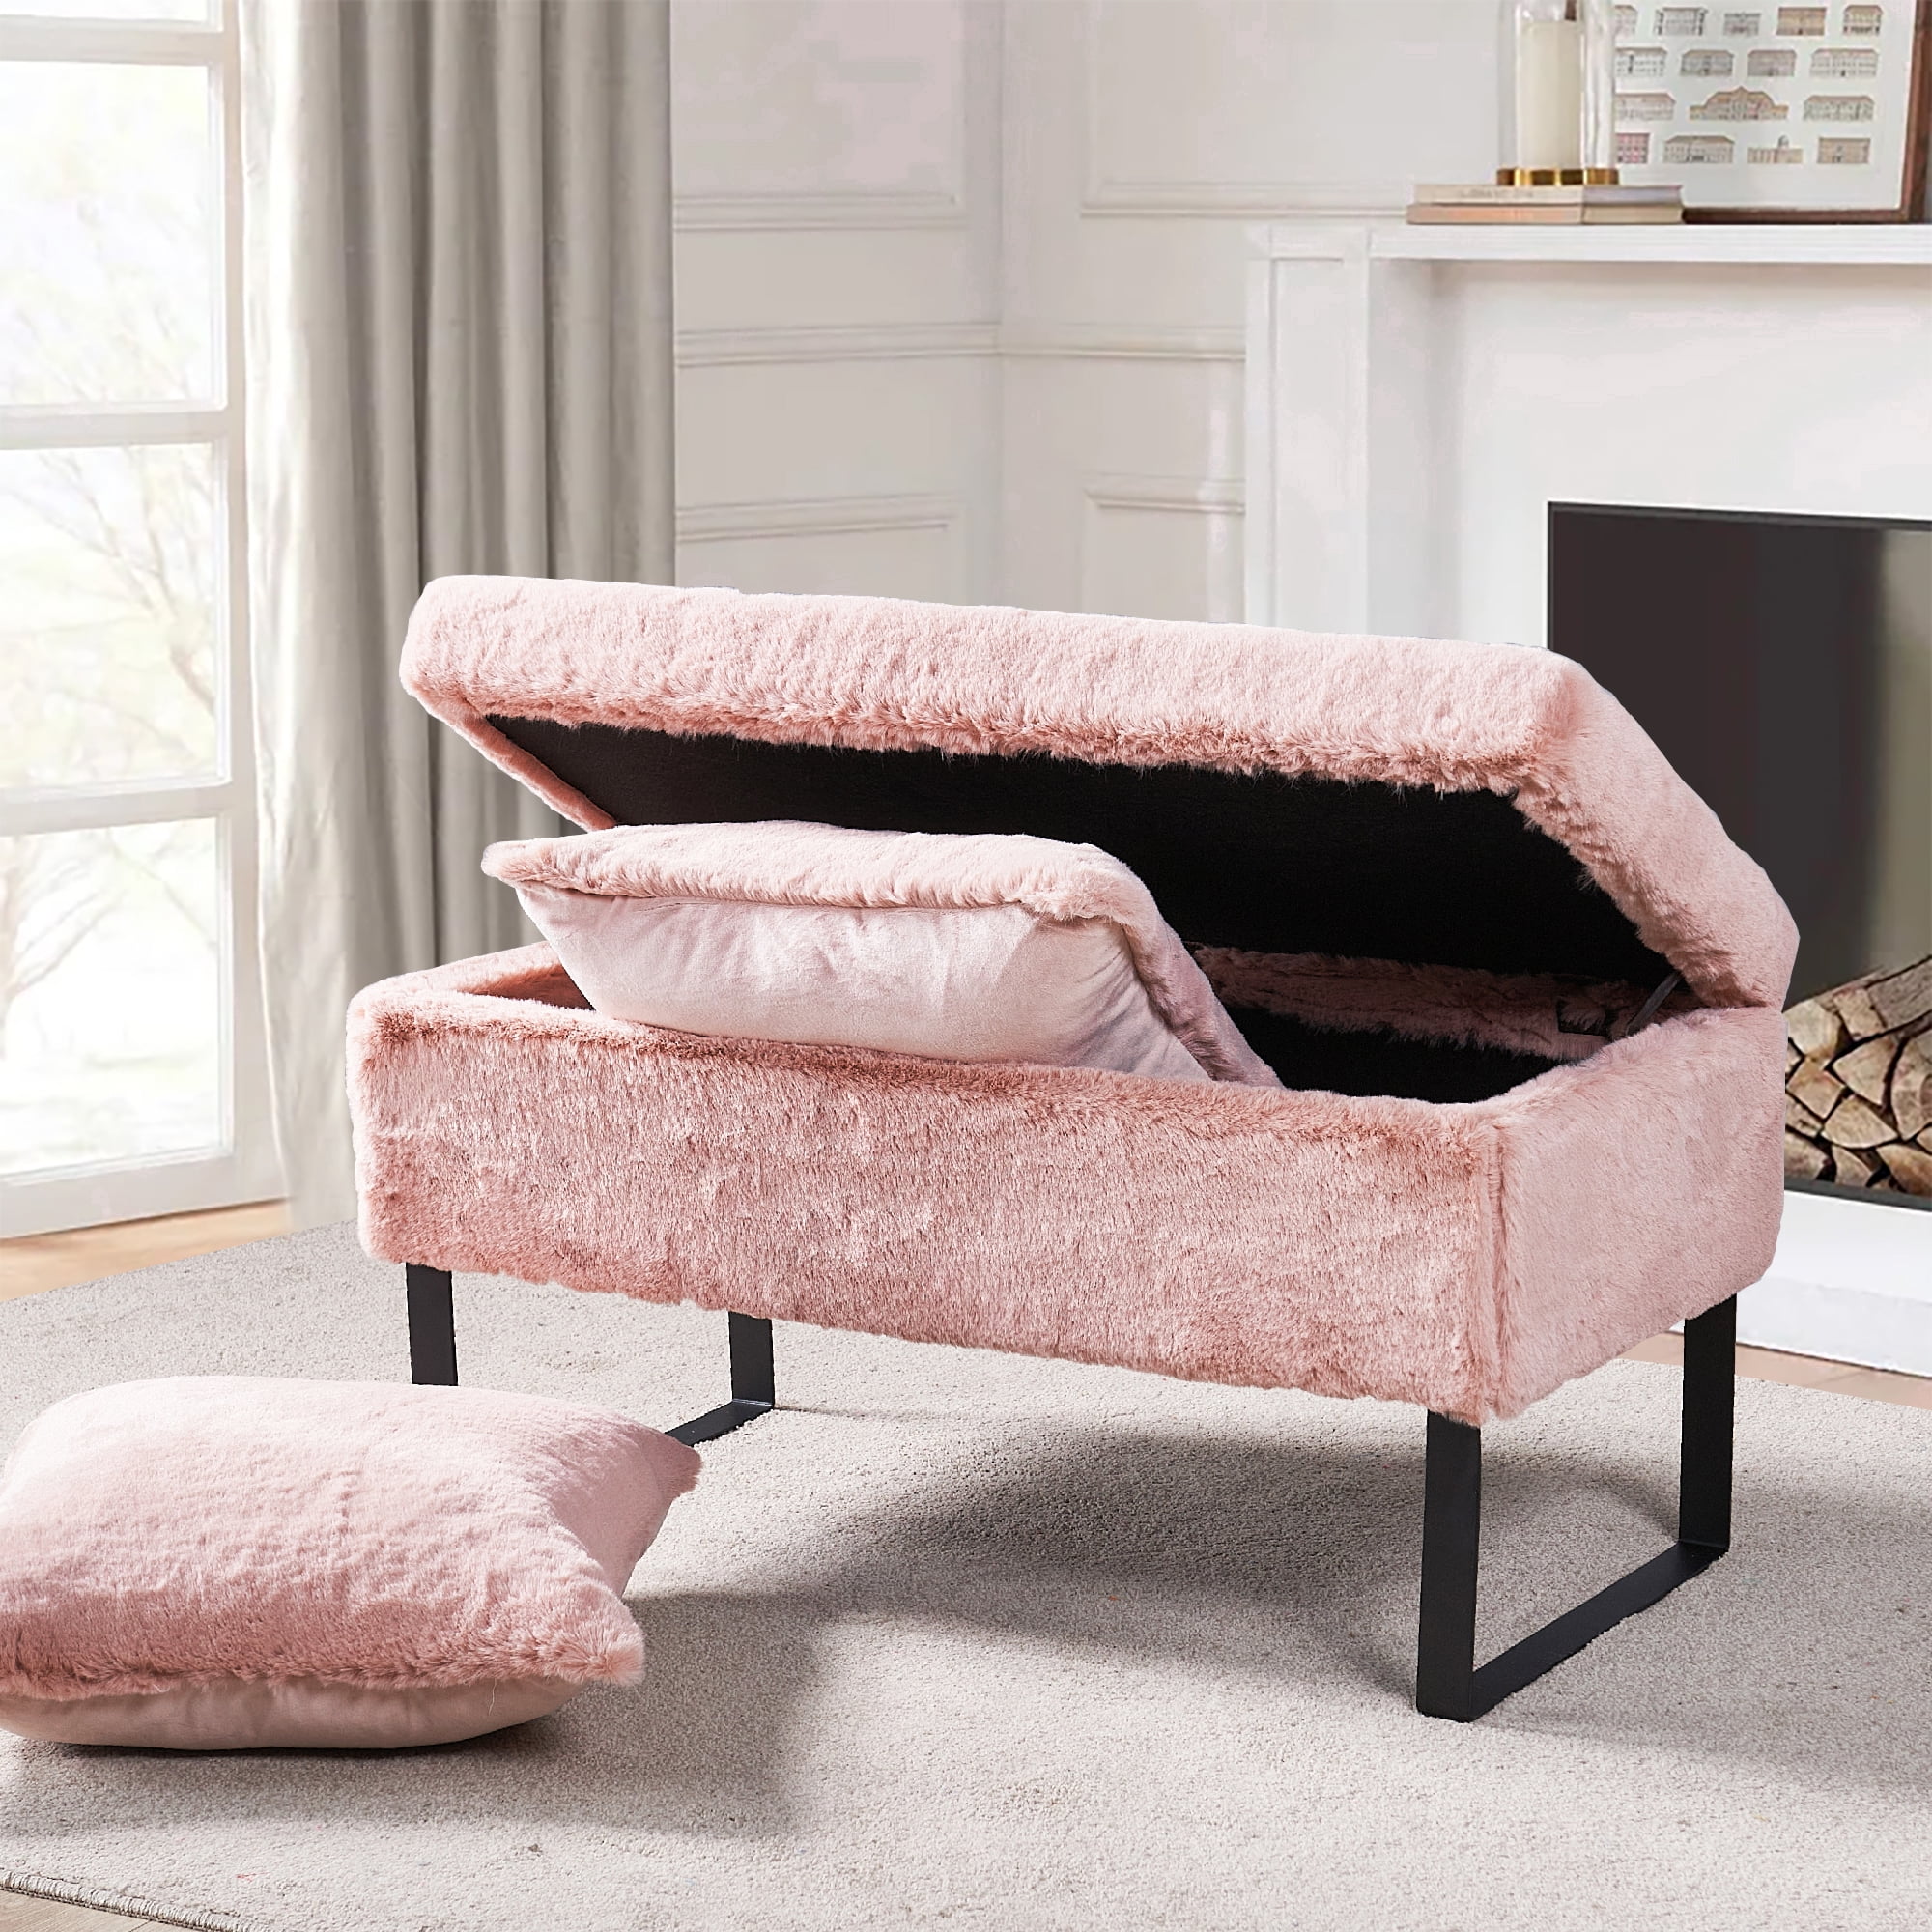 Home Soft Things Pink Jacquard Solid Faux Fur Round Ottoman, 18 x 18 x  18, Sepia Rose, Comfy Fuzzy Ottoman Makeup Stool for Bedroom Living Room